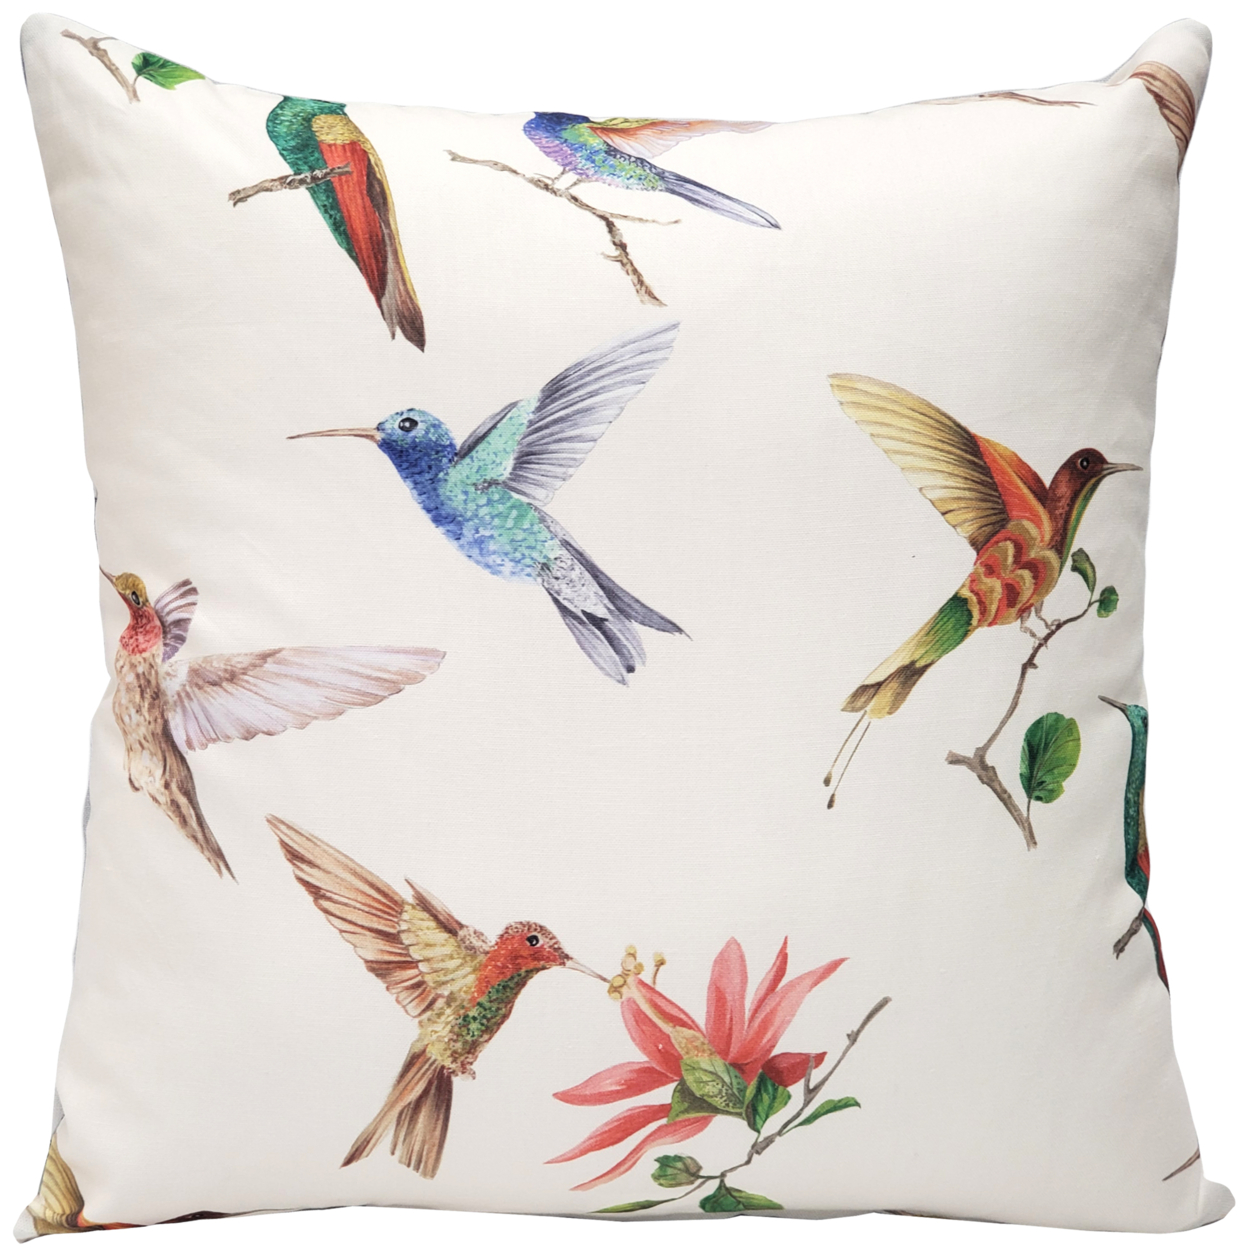 Monteverde Hummingbird Throw Pillow 21x21 Inches Square, Complete Pillow With Polyfill Pillow Insert